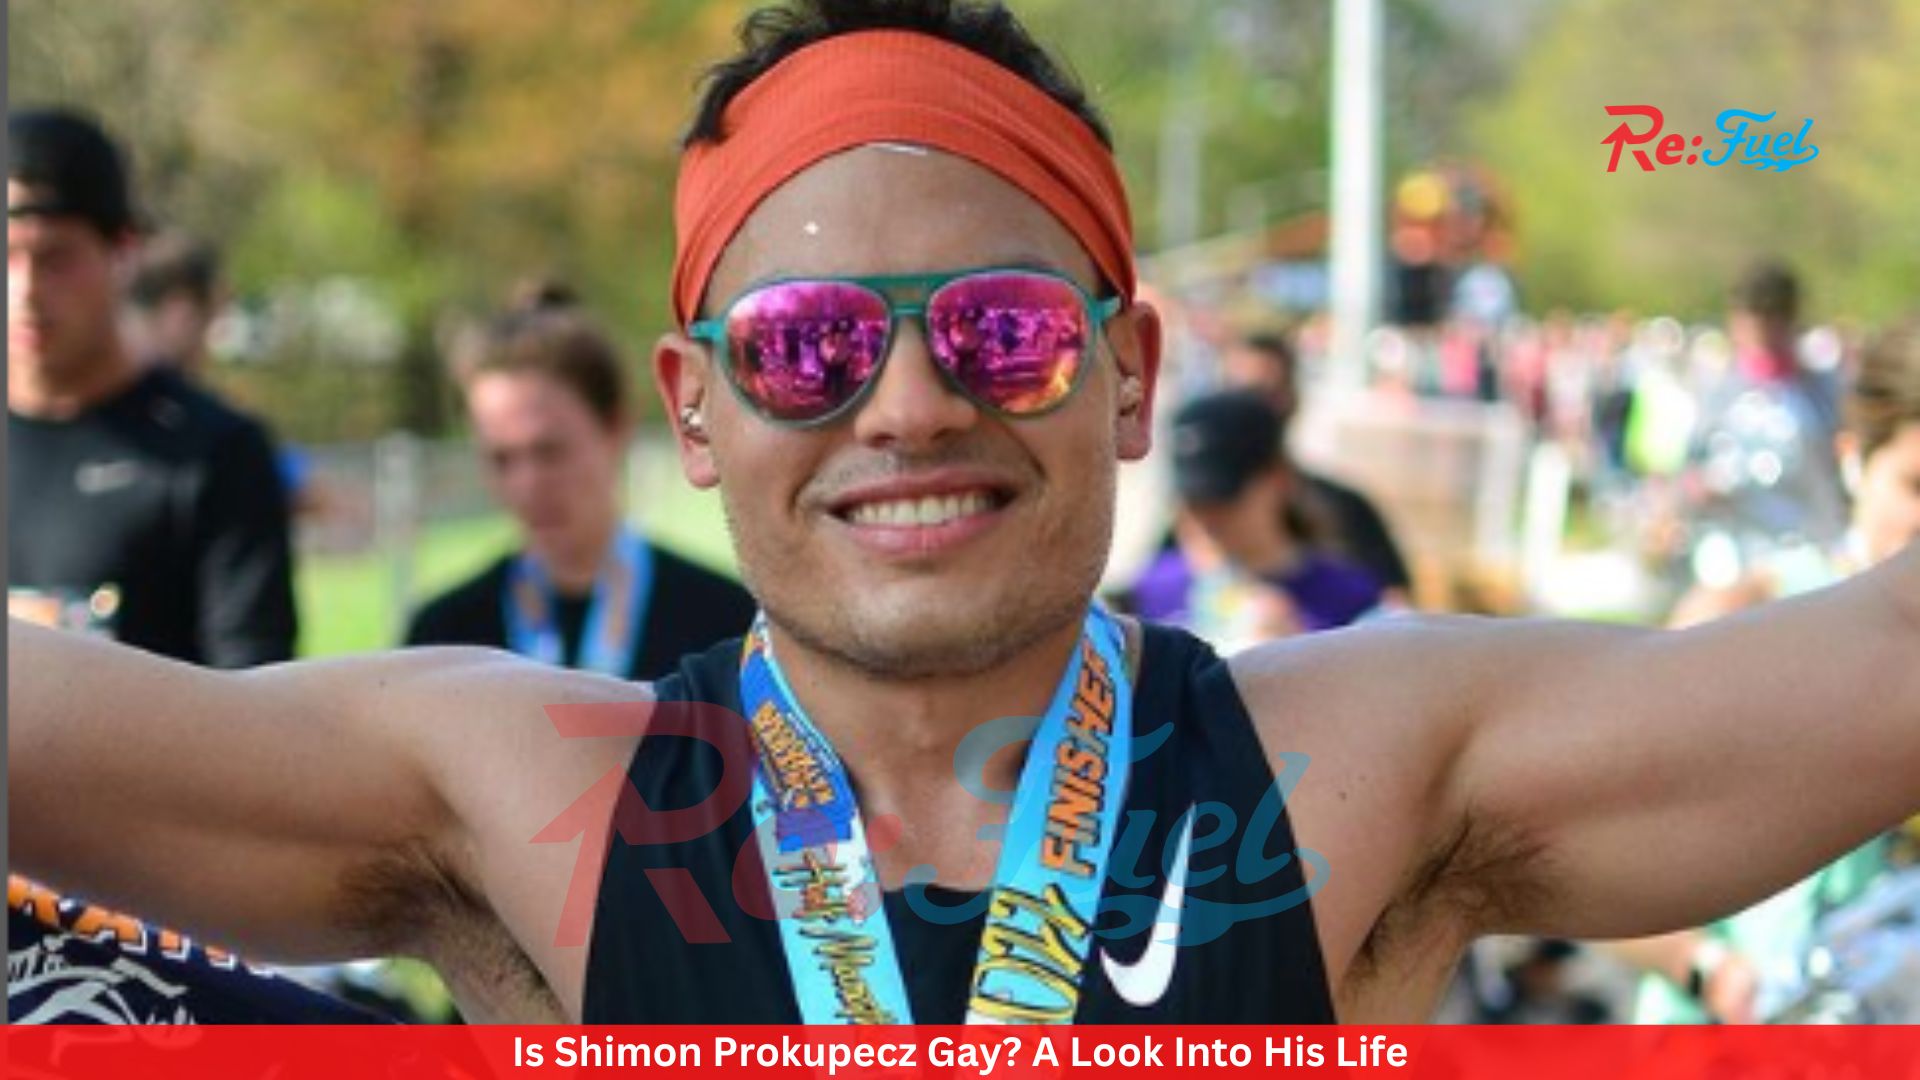 Is Shimon Prokupecz Gay? A Look Into His Life